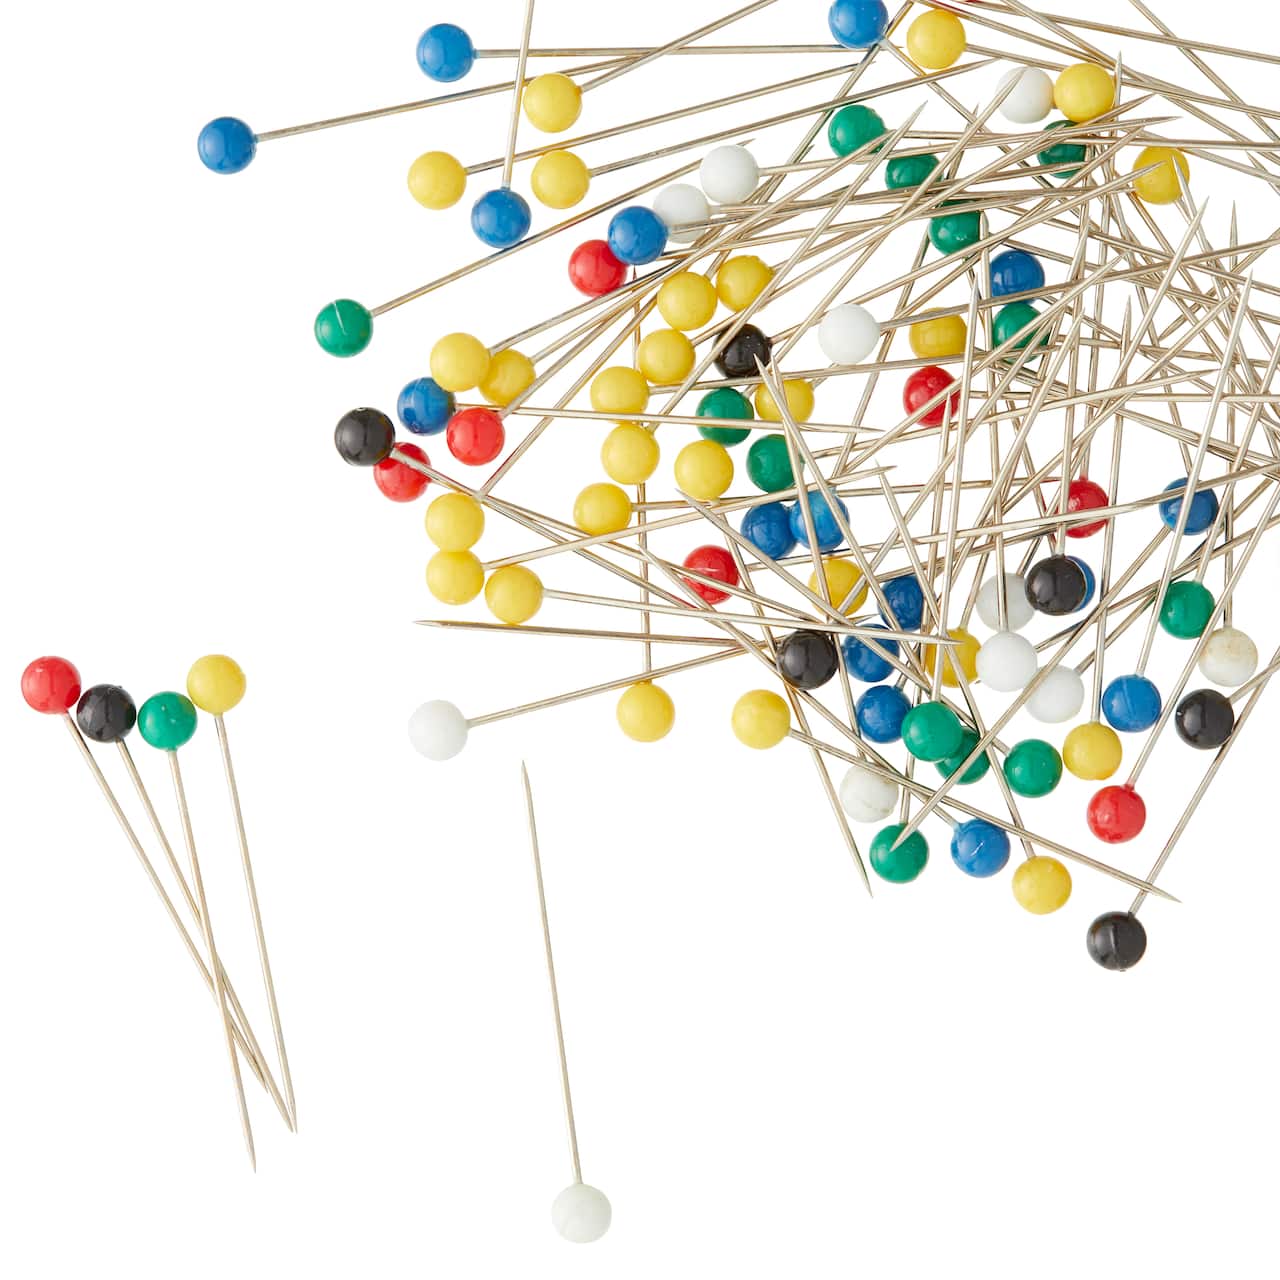 Loops &#x26; Threads&#x2122; Color Ball Pins